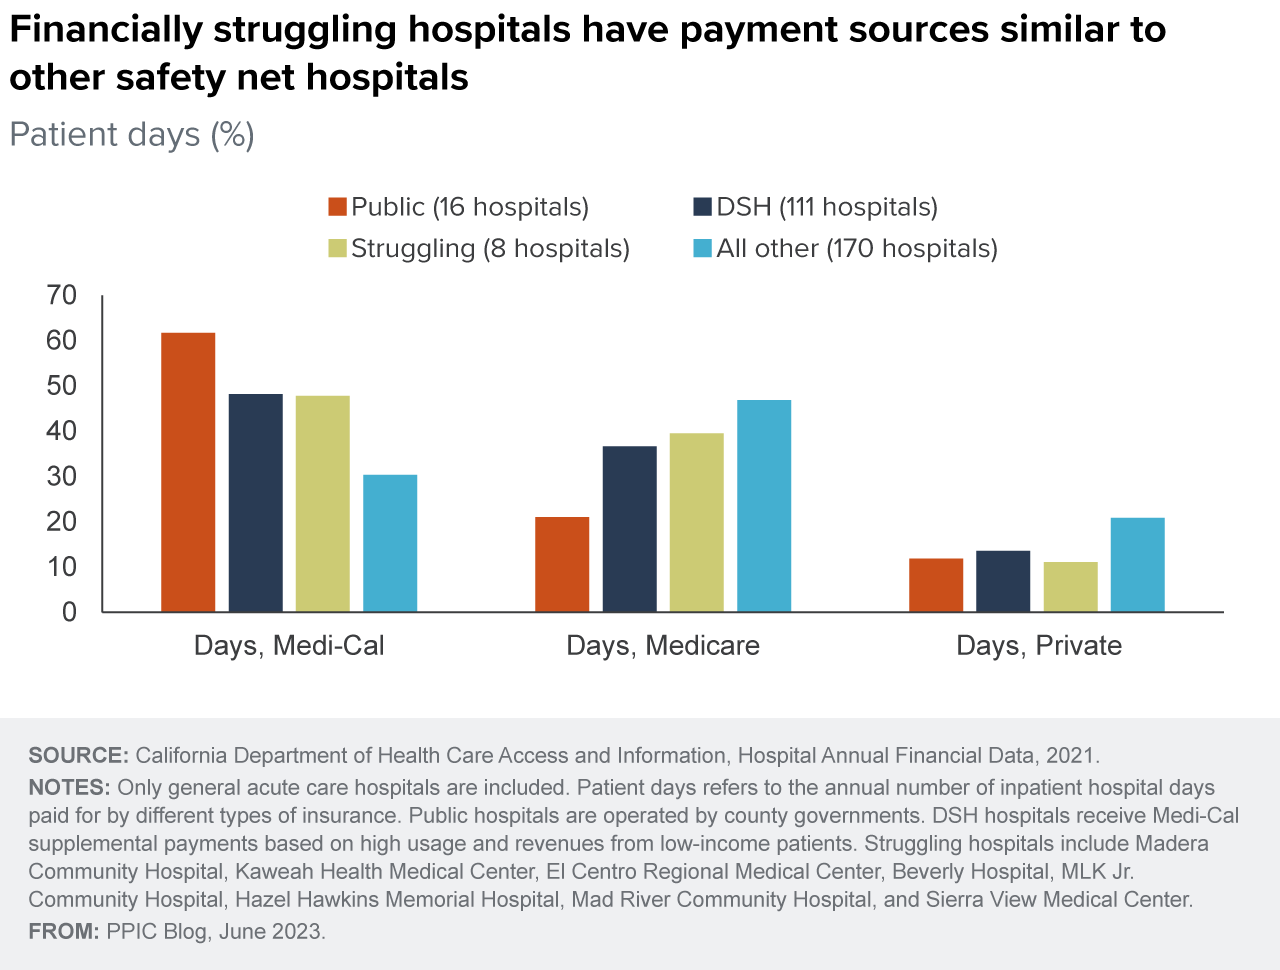 figure - Financially struggling hospitals have payment sources similar to other safety net hospitals